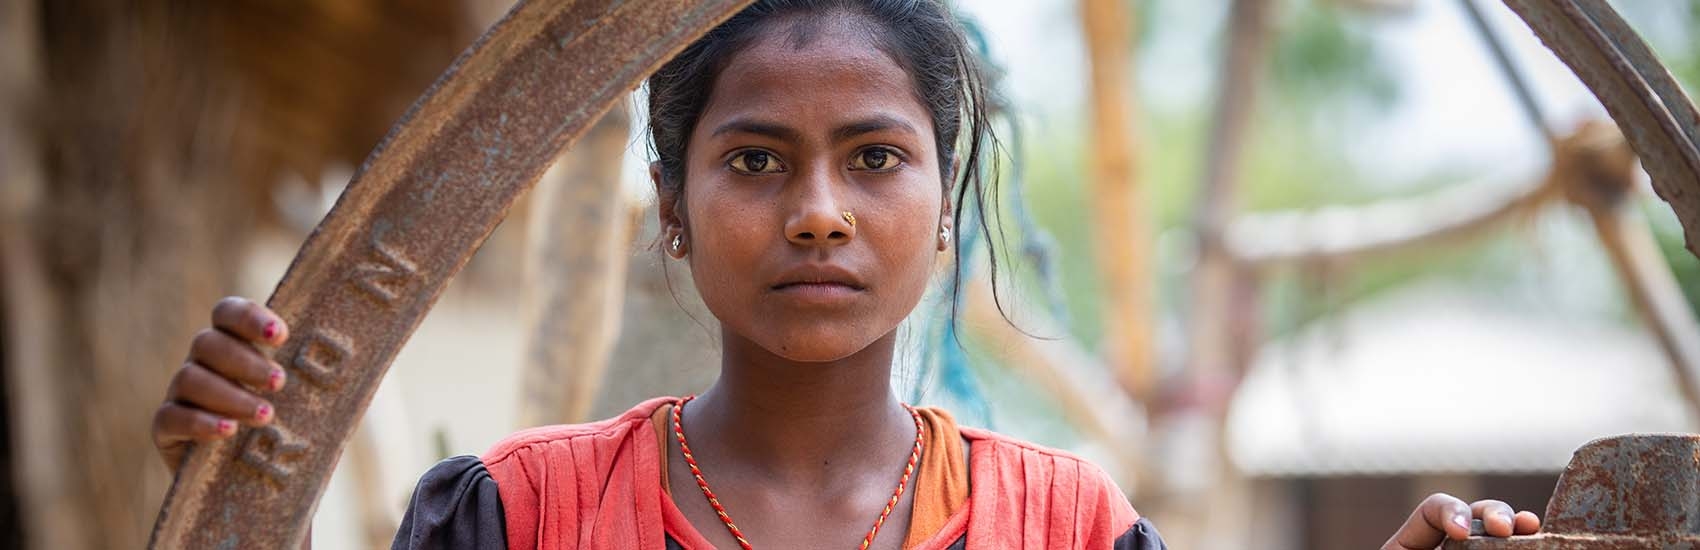 Child Marriage: A Violation of Child Rights